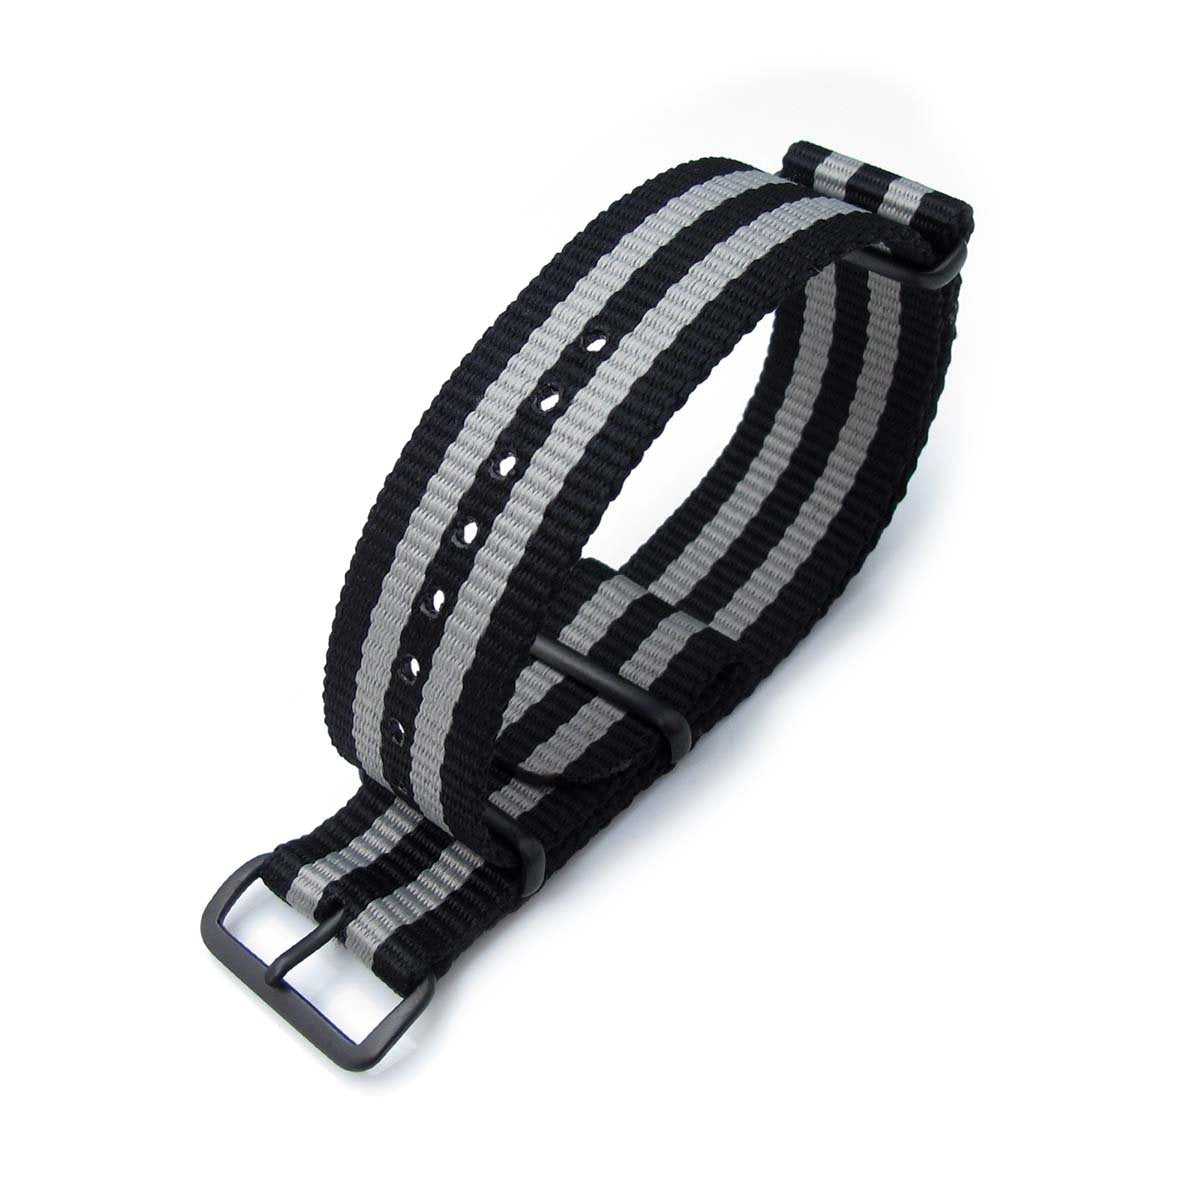 MiLTAT 22mm or 24mm G10 Military Watch Strap Ballistic Nylon Armband PVD Black &amp; Grey Stripes Strapcode Watch Bands